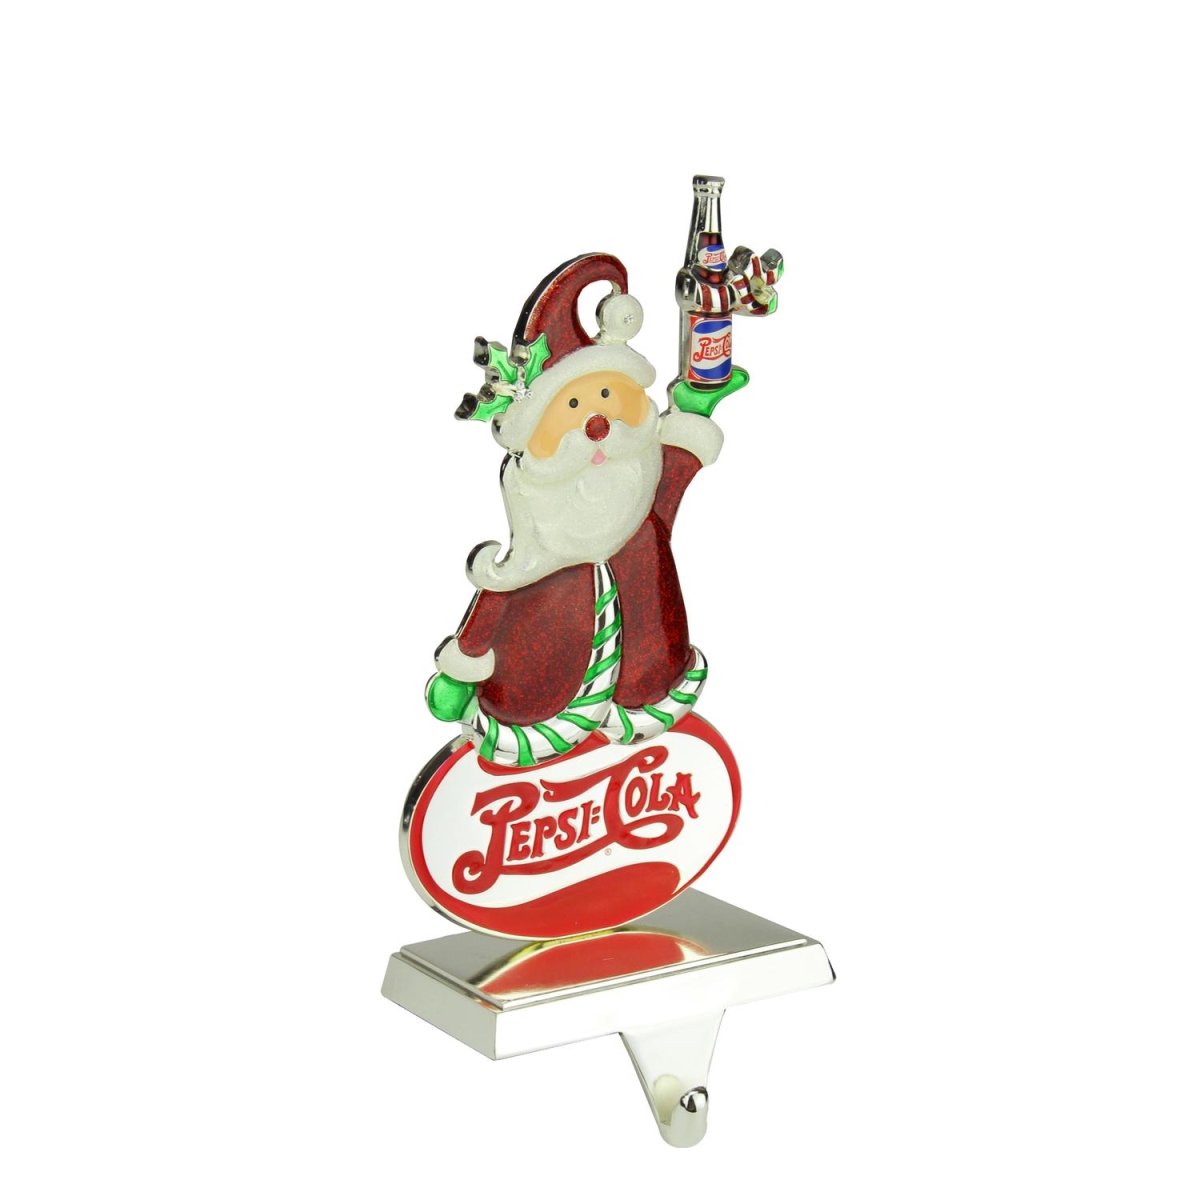 32279779 9.75 In. Pepsi-cola Santa Claus Christmas Stocking Holder With European Crystals - Silver Plated